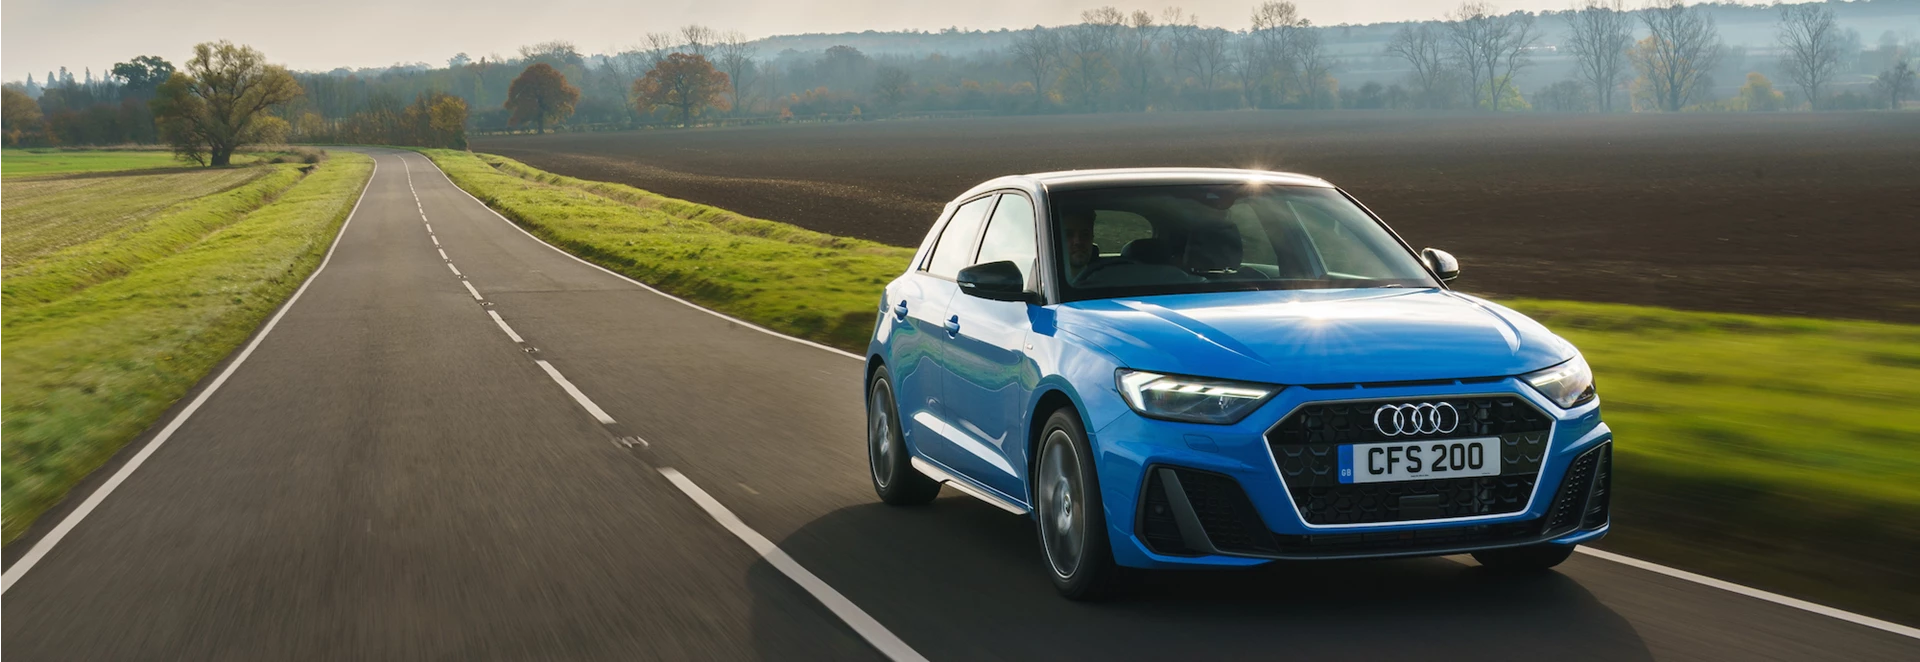 2019 Audi A1: prices and specs revealed!